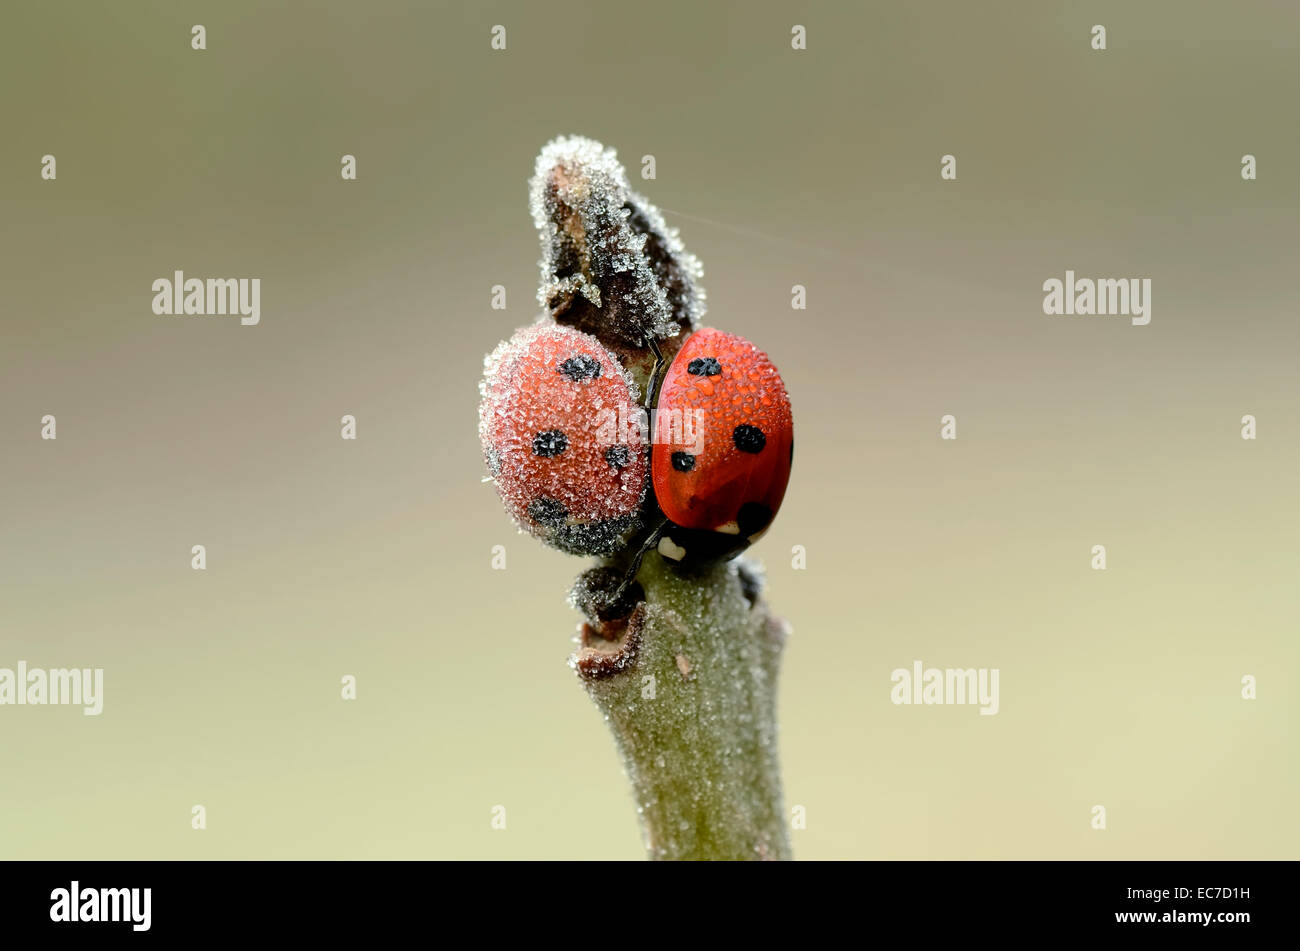 Two seven-spotted ladybirds, Coccinella septempunctata, on a twig covered with frost Stock Photo